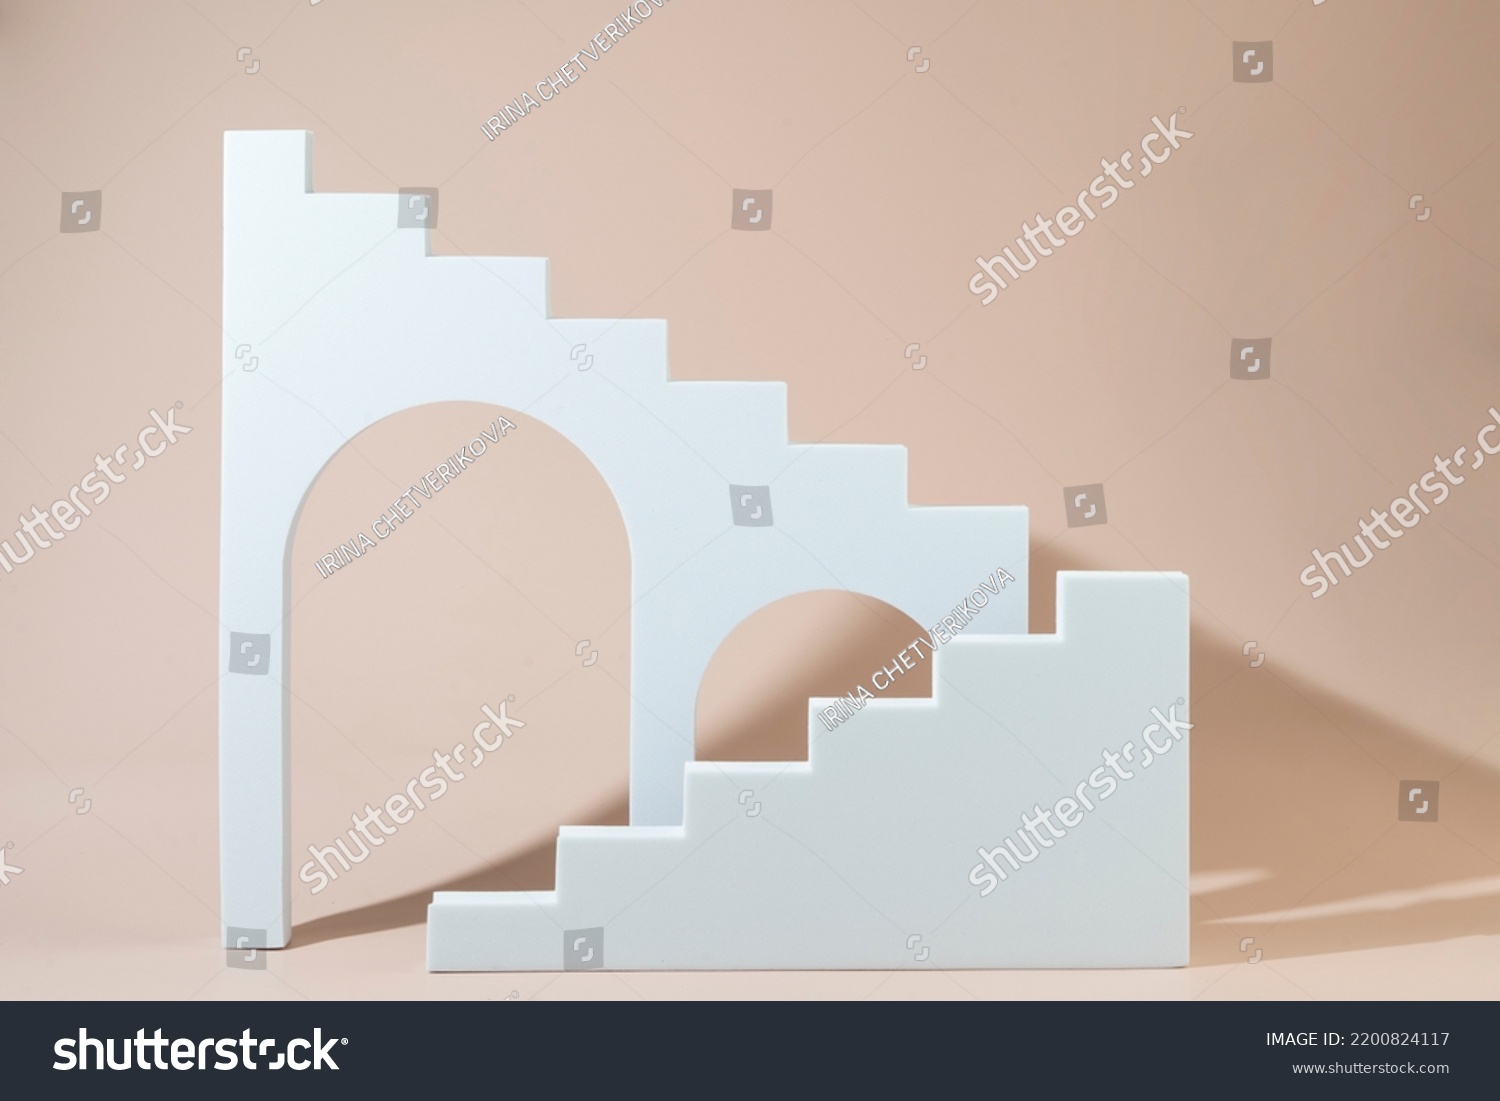 Geometric shapes stairs podiums and archs standing on a beige background #2200824117